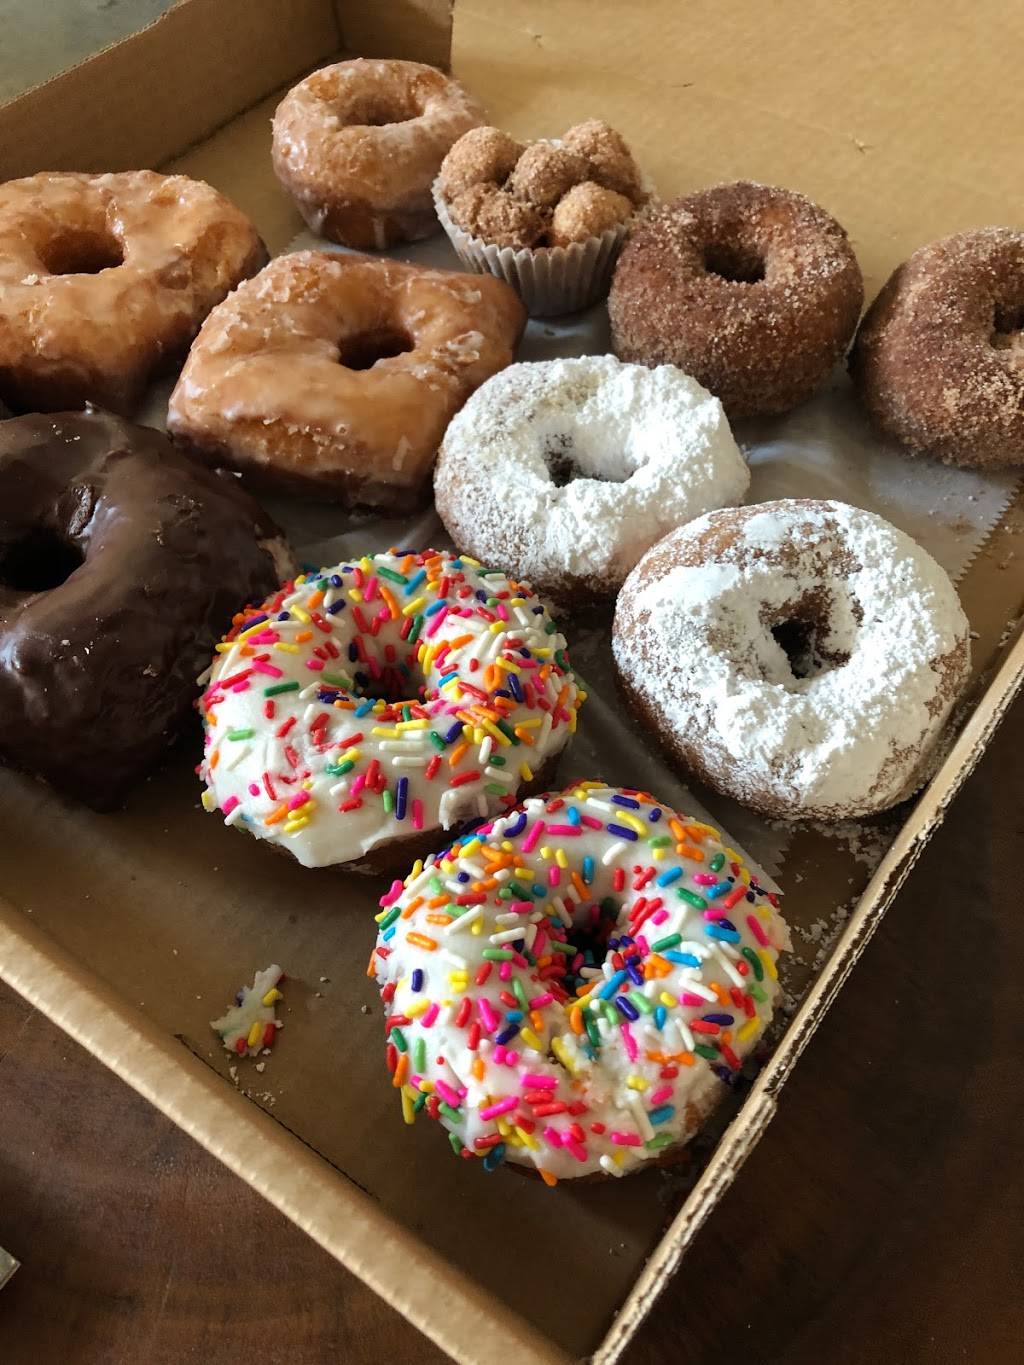 North Lime Coffee & Donuts - Clays Mill | 3101 Clays Mill Rd #300a, Lexington, KY 40503 | Phone: (859) 303-6114